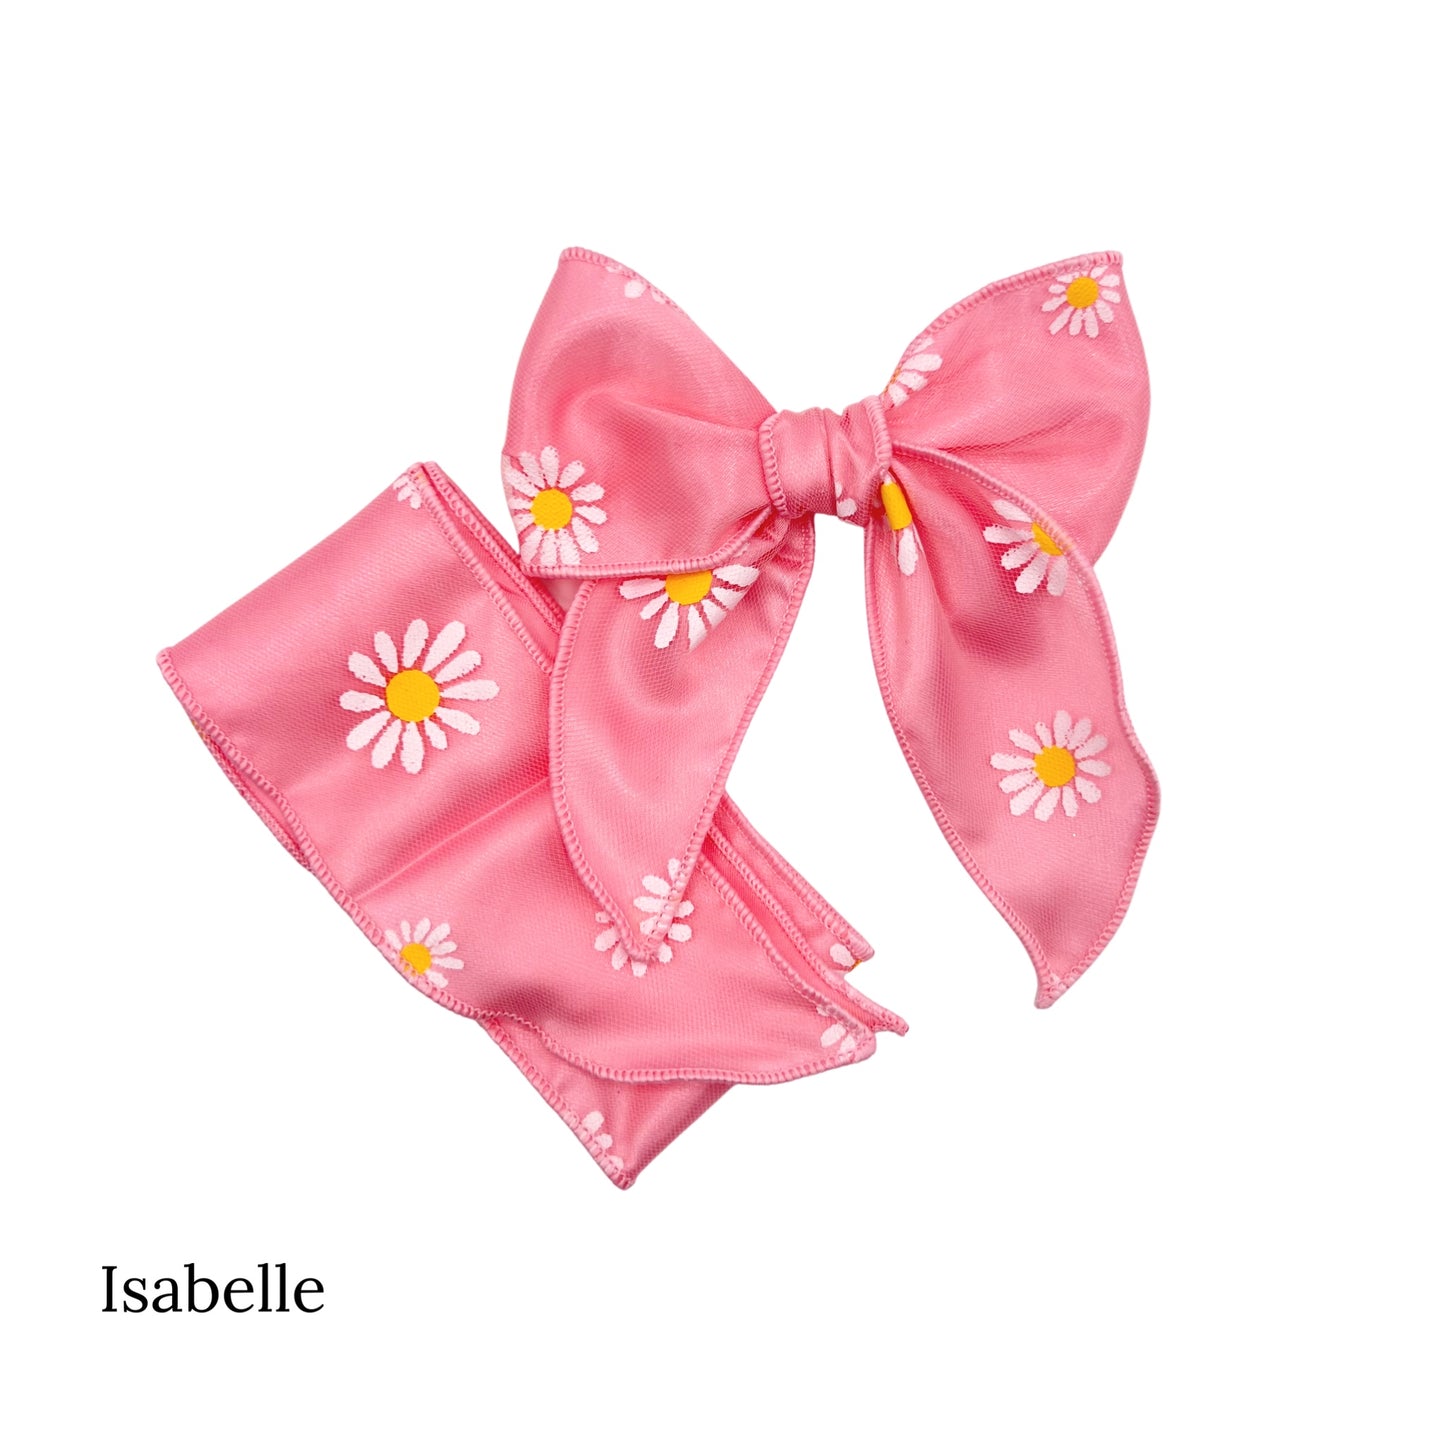 White flowers with yellow center on pink tulle isabelle bow strips